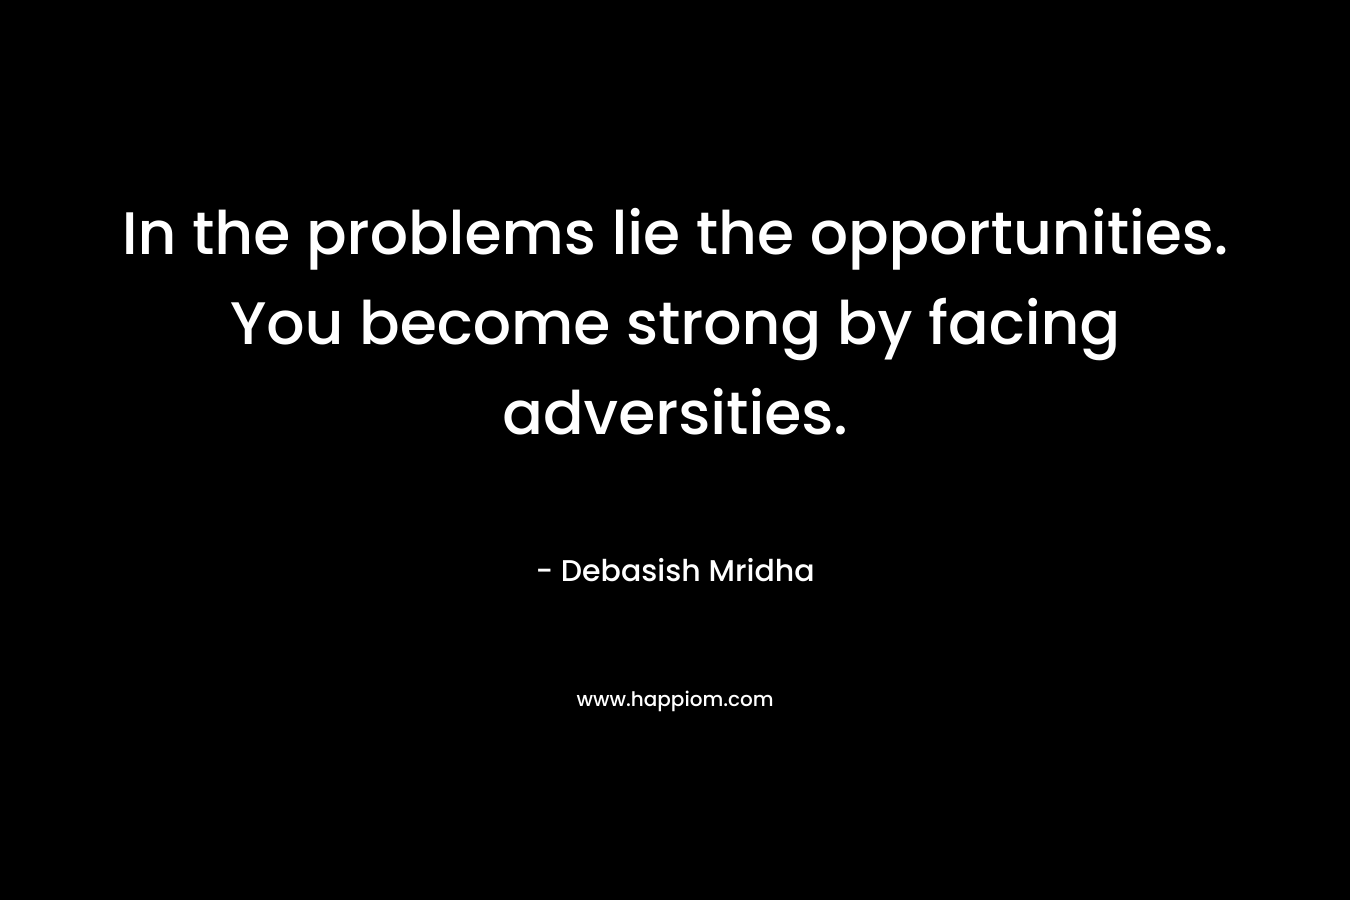 In the problems lie the opportunities. You become strong by facing adversities.